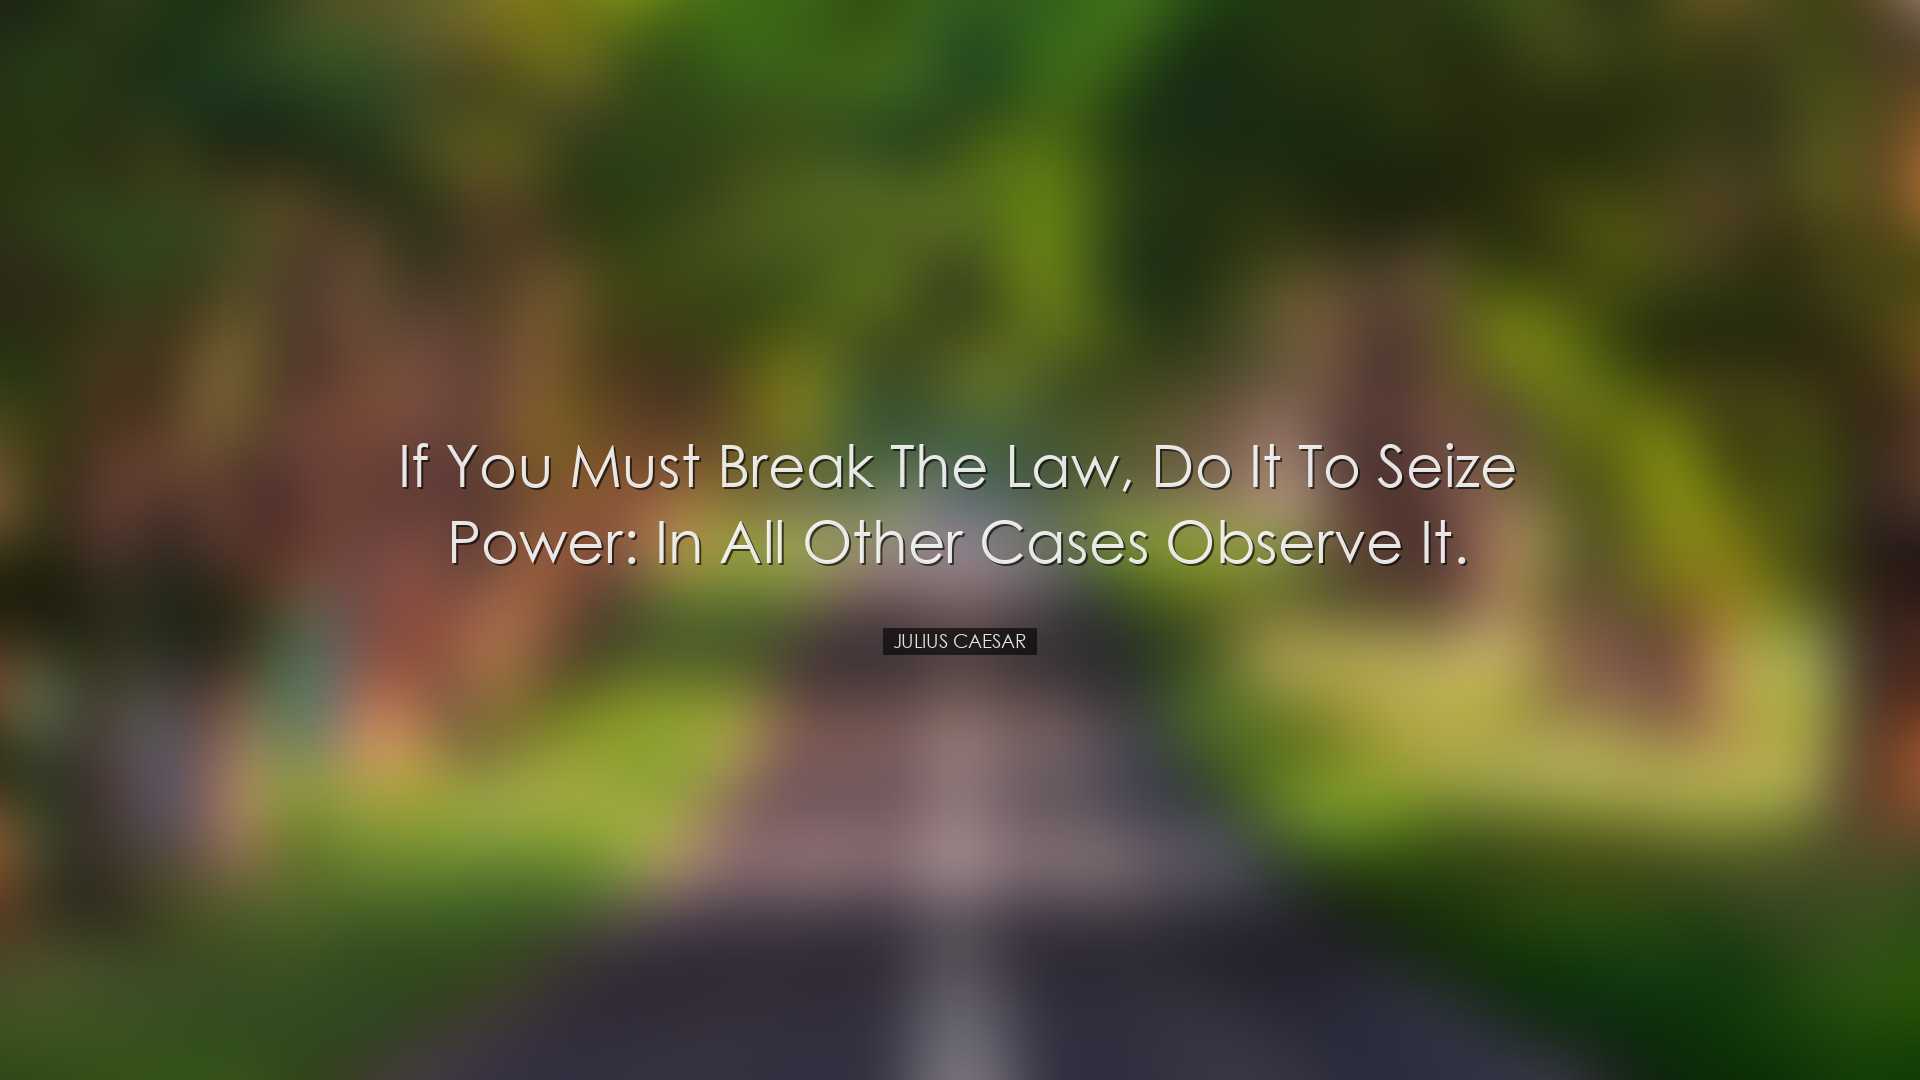 If you must break the law, do it to seize power: in all other case